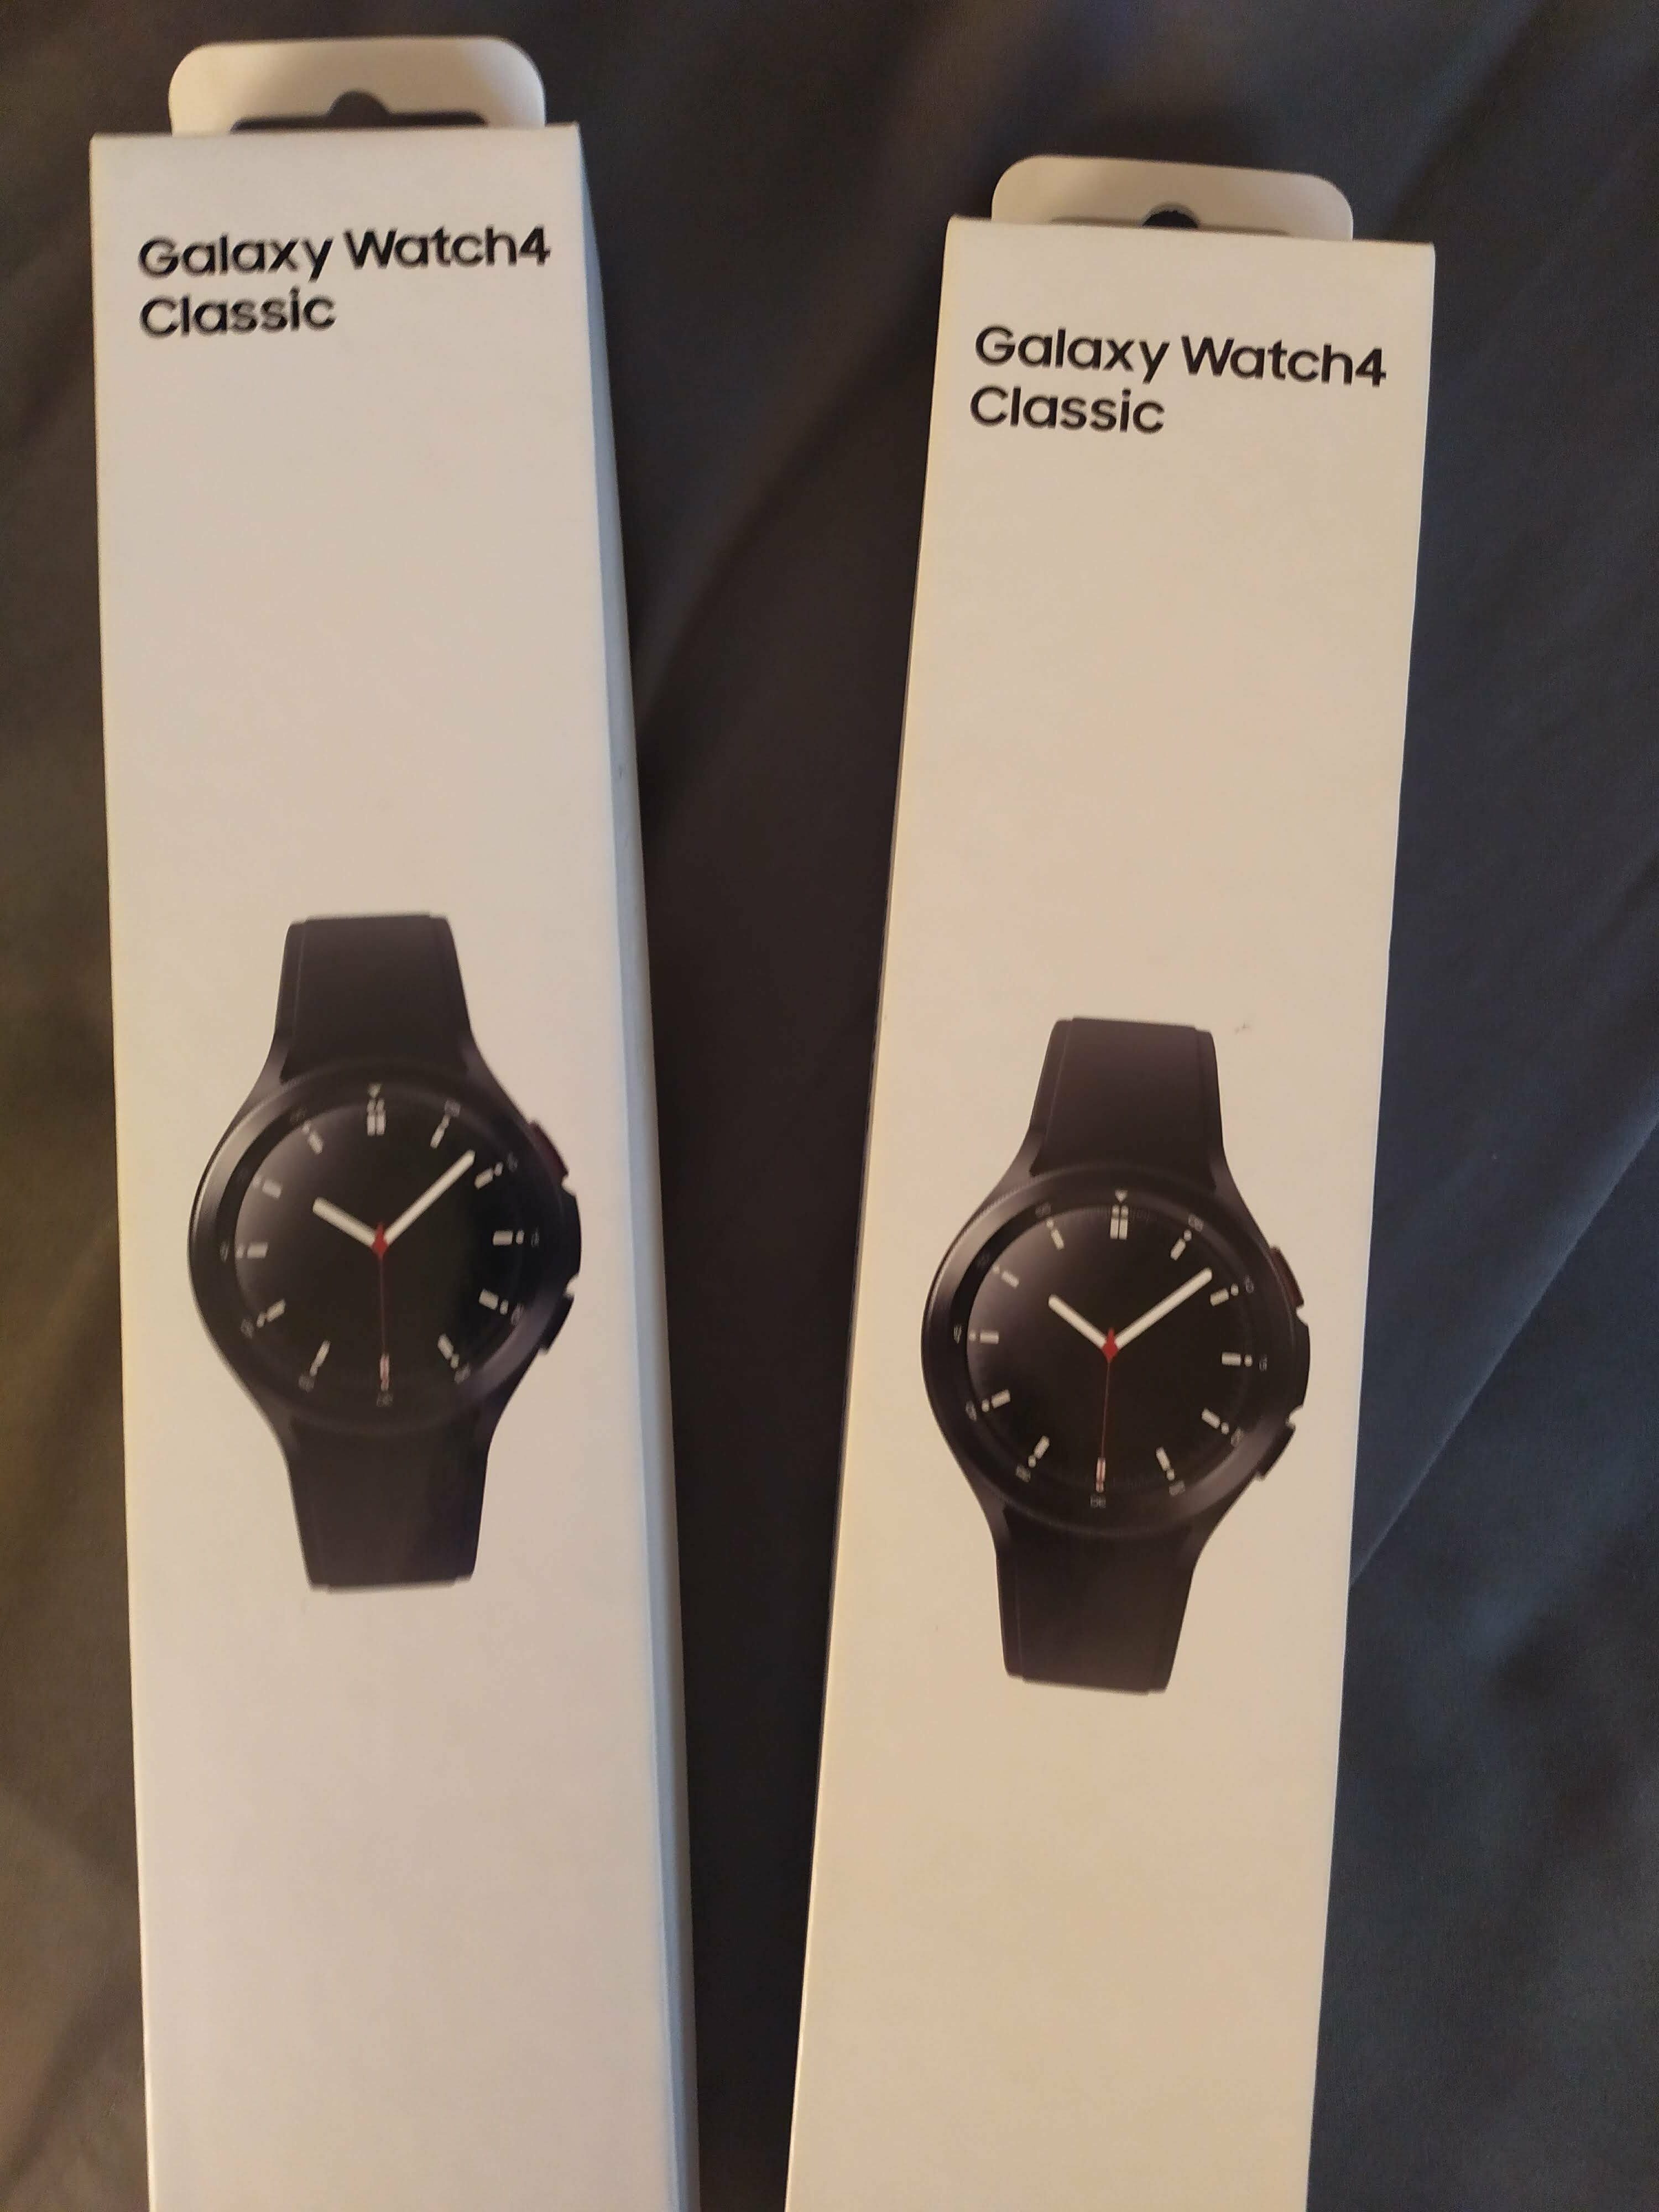 Walmart] [YMMV] Samsung Galaxy Watch4 Classic 46MM - In-Store Only -  Limited Stock - $99 - RedFlagDeals.com Forums